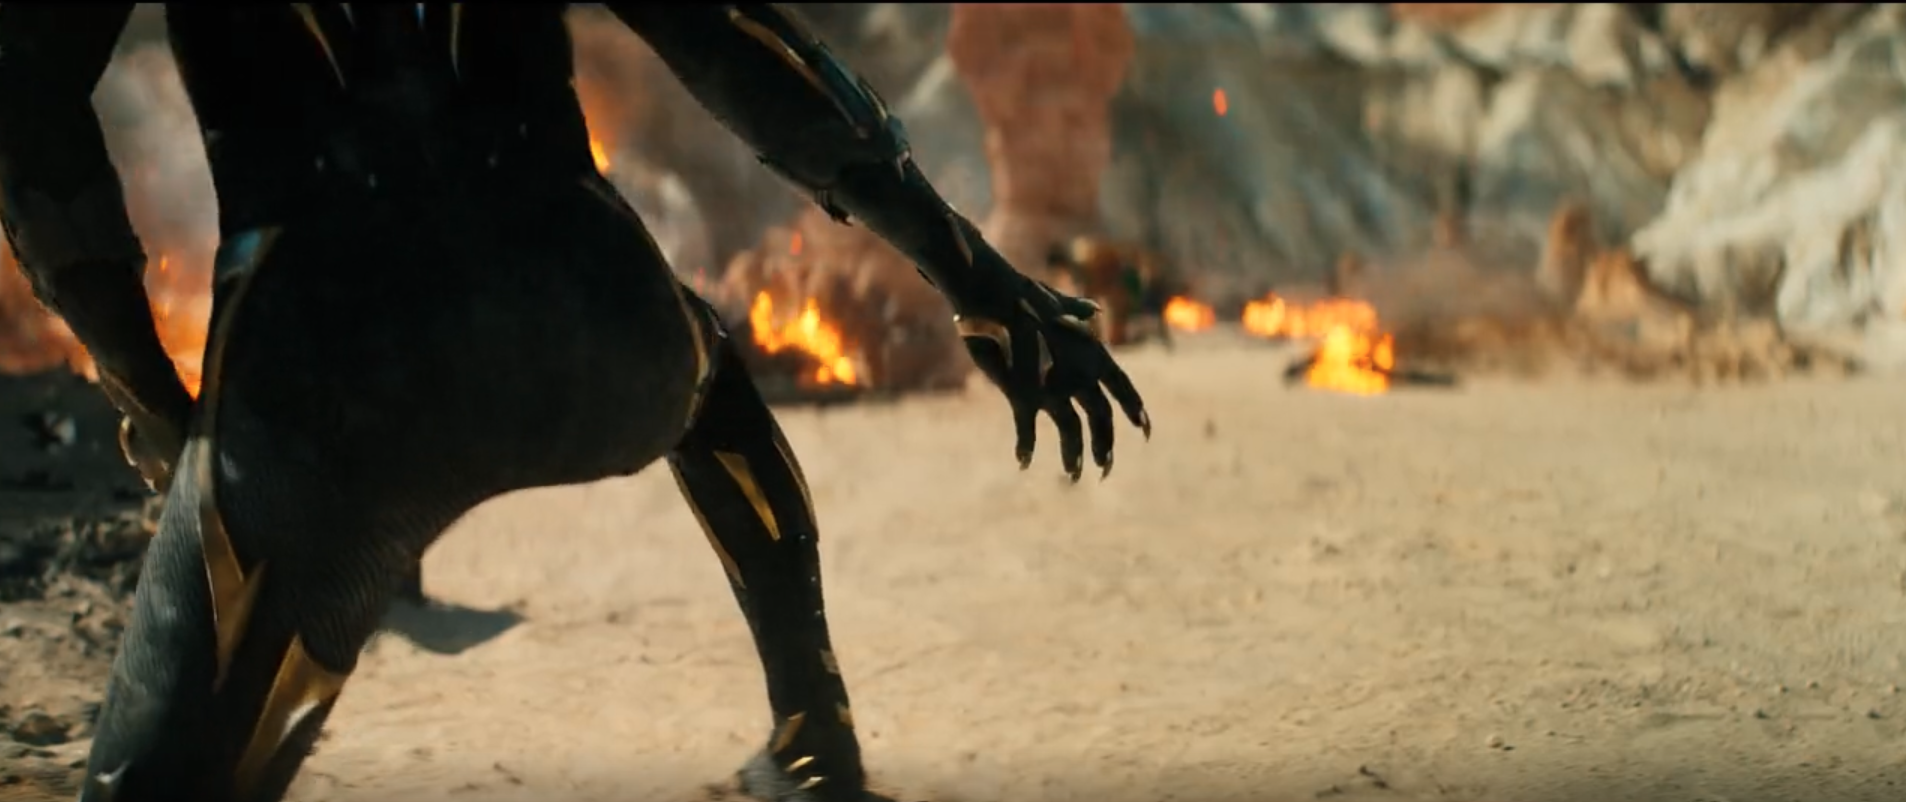 ‘Black Panther: Wakanda Forever’ Trailer Nabs 172 Million Views in 24 Hours, One of Marvel’s Biggest 